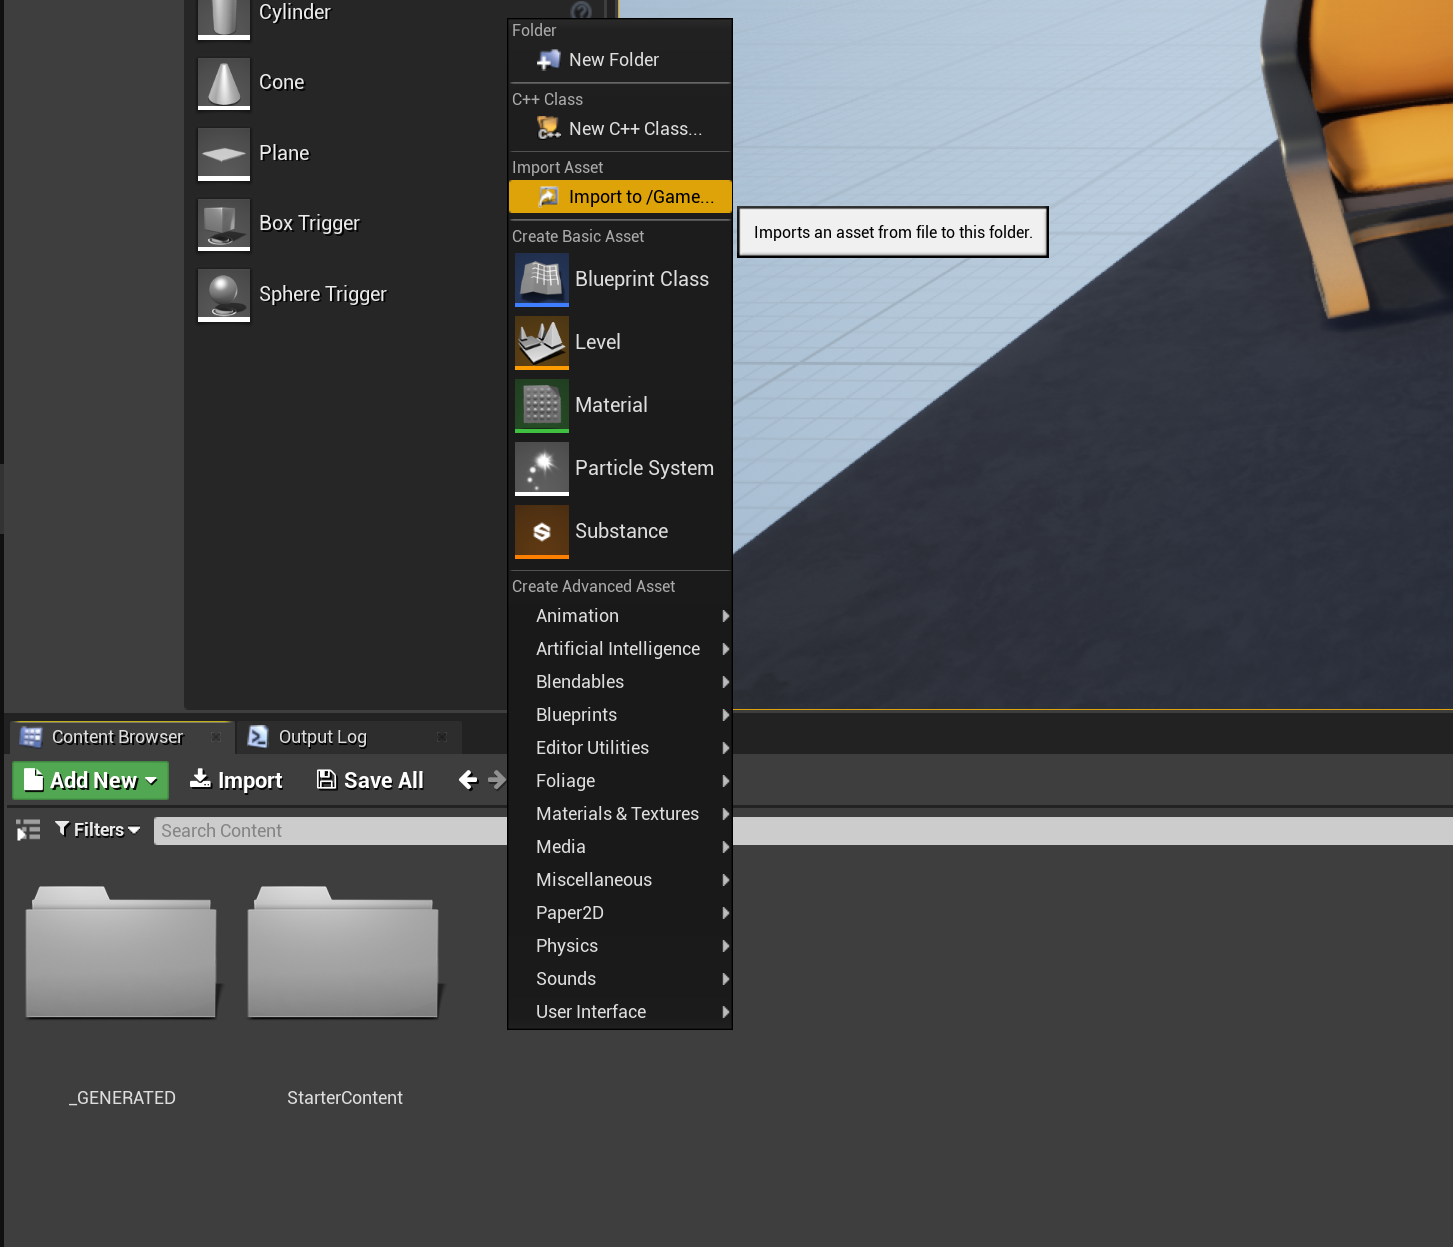  to import a mesh file (FBX or OBJ) as a StaticMesh asset, right-click in the  Content Browser  and select  Import To /Game  